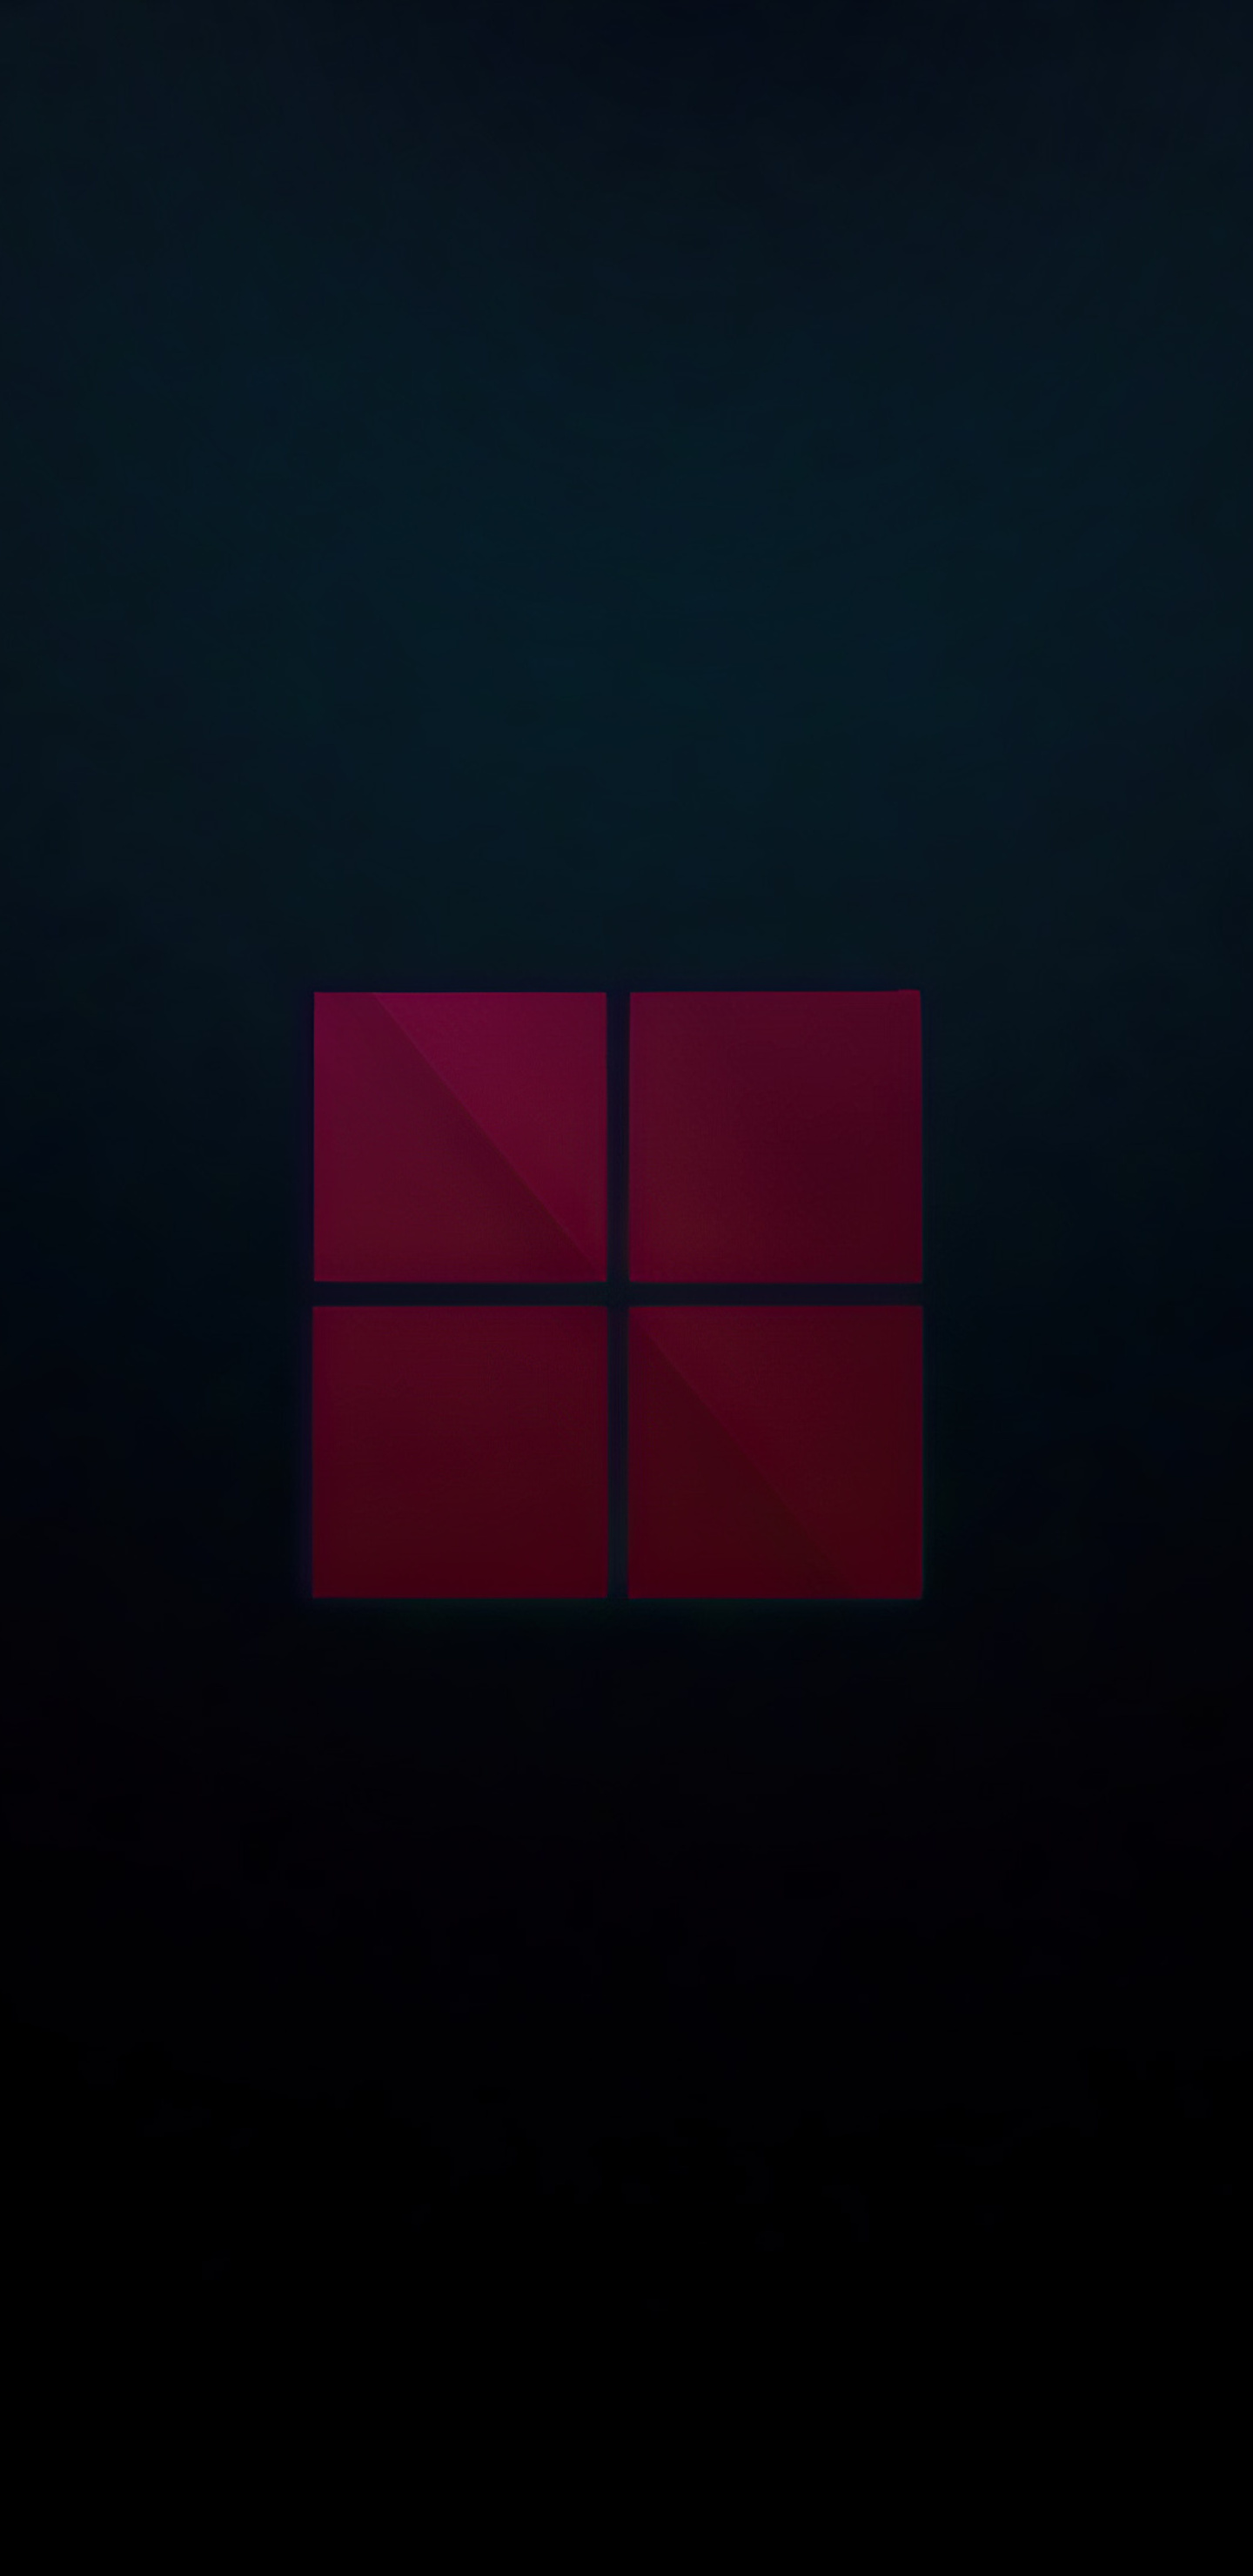 1440x2960 Windows 11 Dark 4k Samsung Galaxy Note 9,8, S9,S8,S8+ QHD HD 4k  Wallpapers, Images, Backgrounds, Photos and Pictures